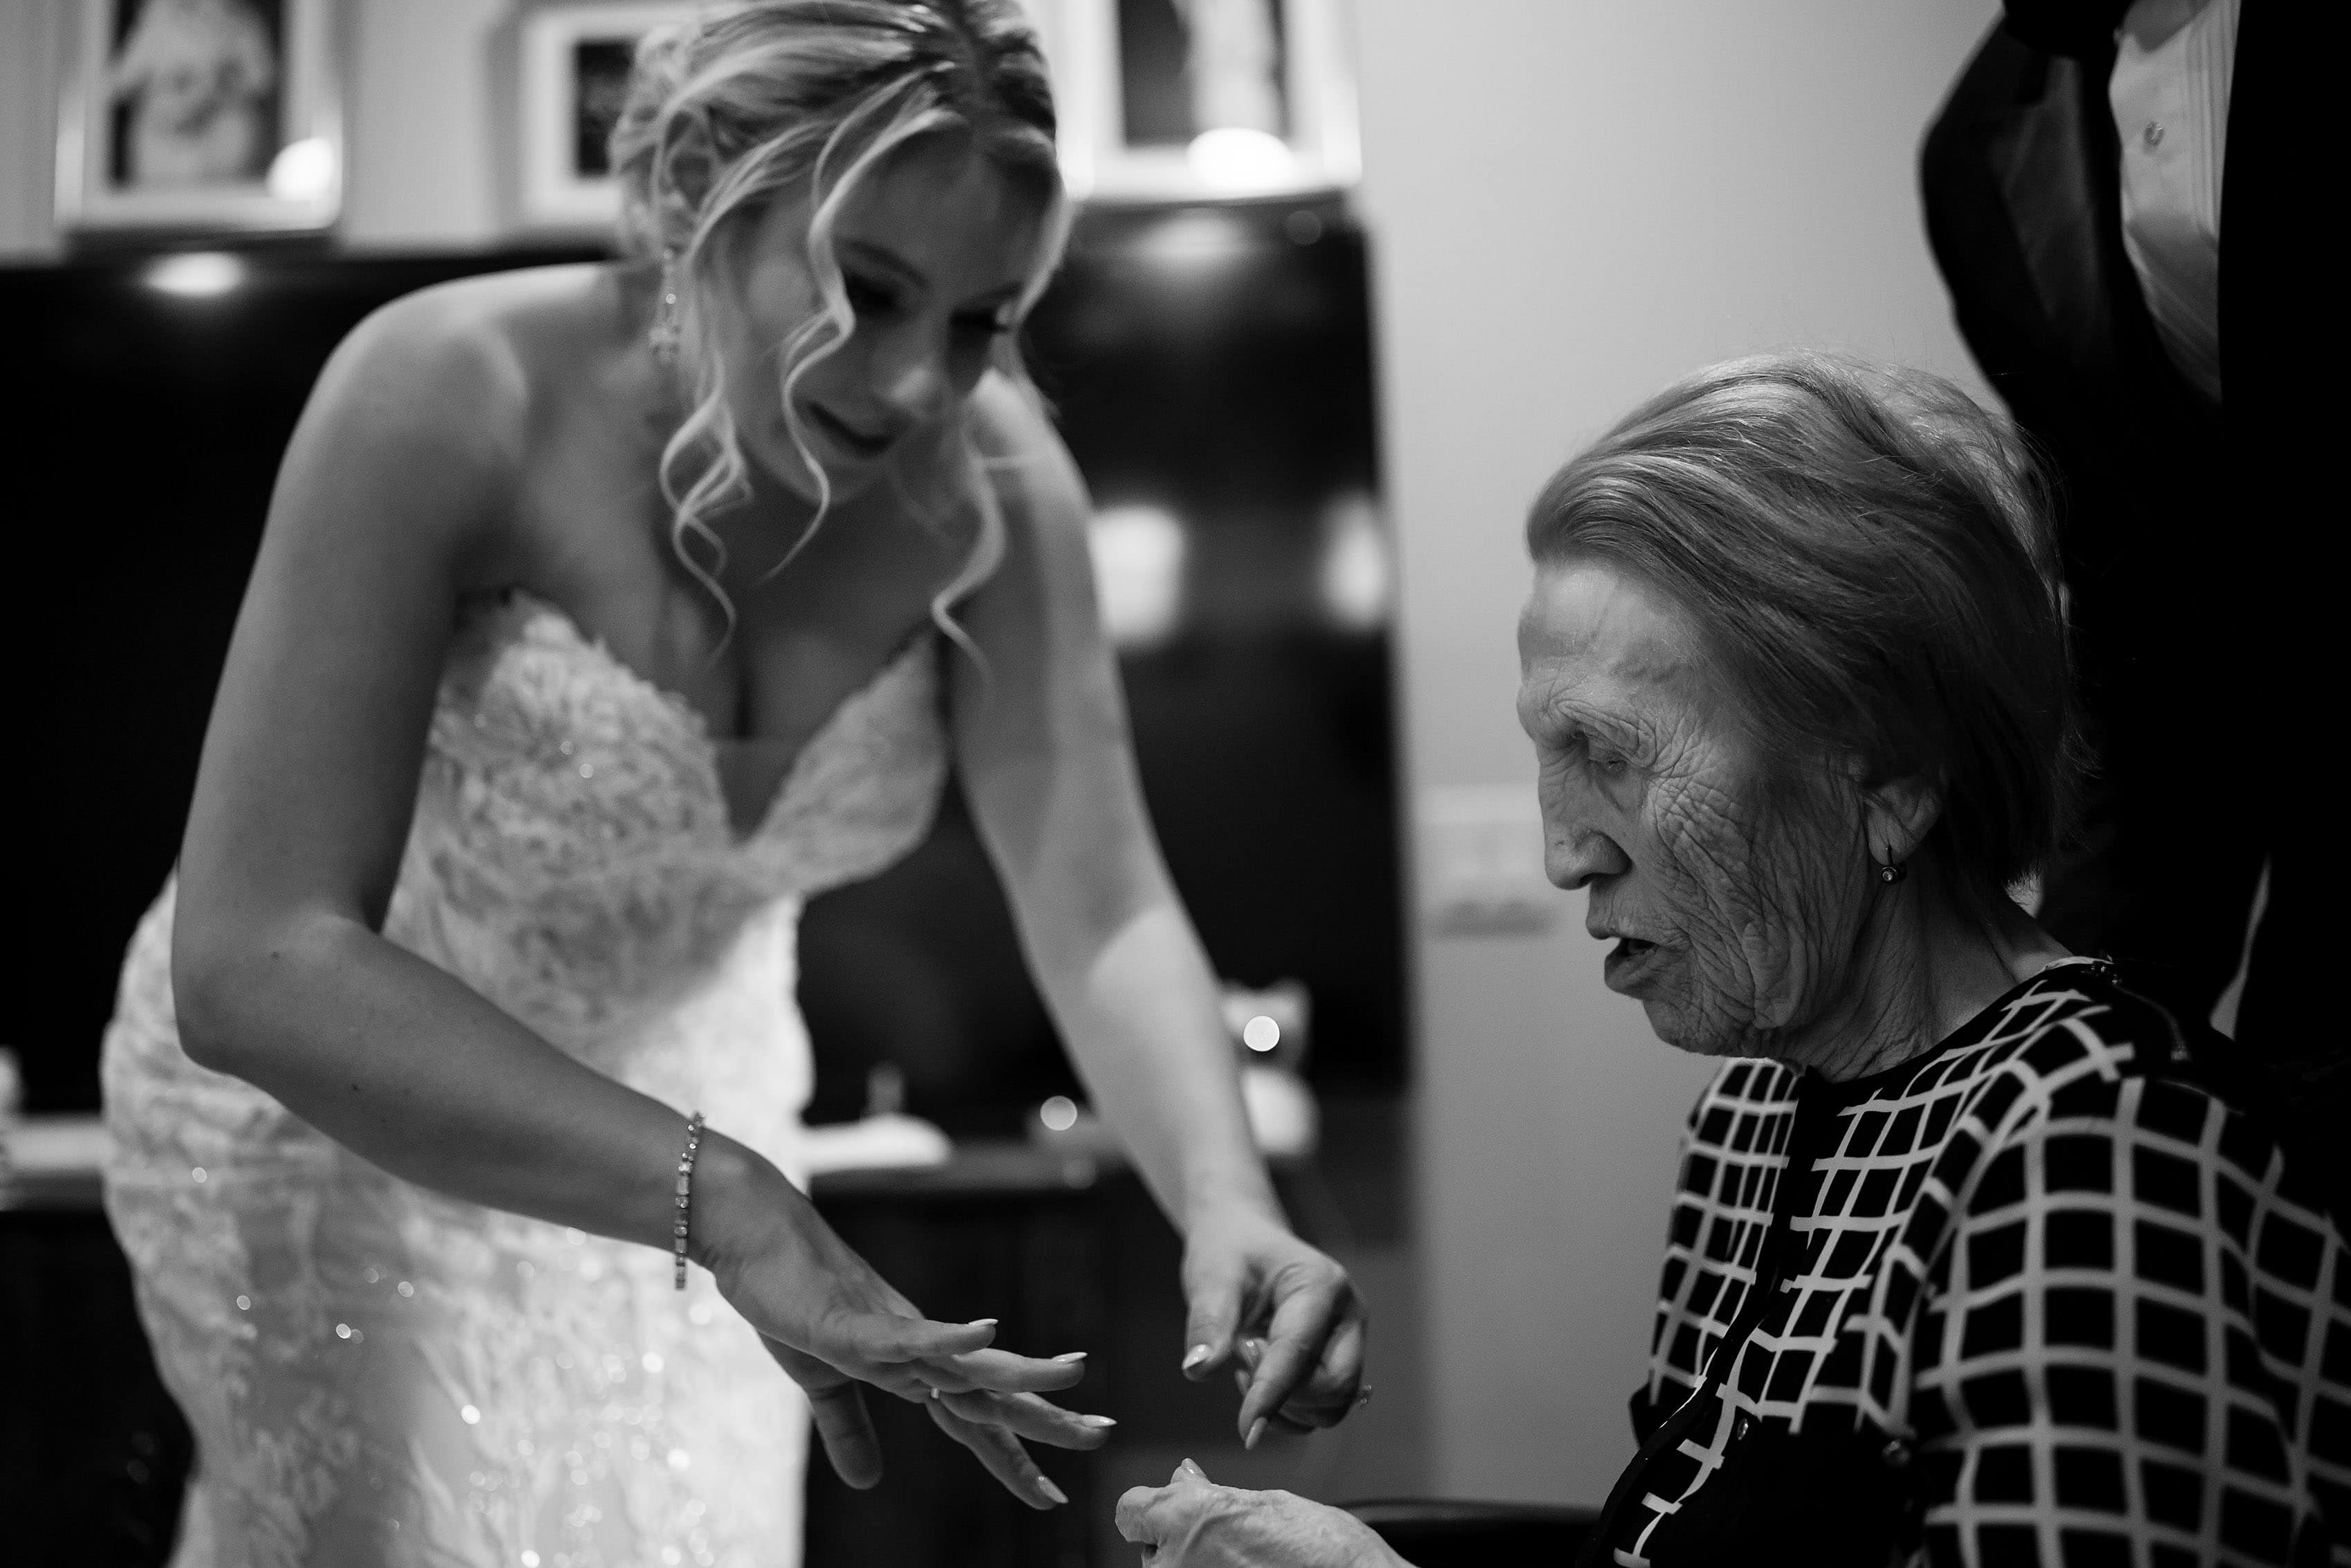 The bride receives a ring from her grandmother